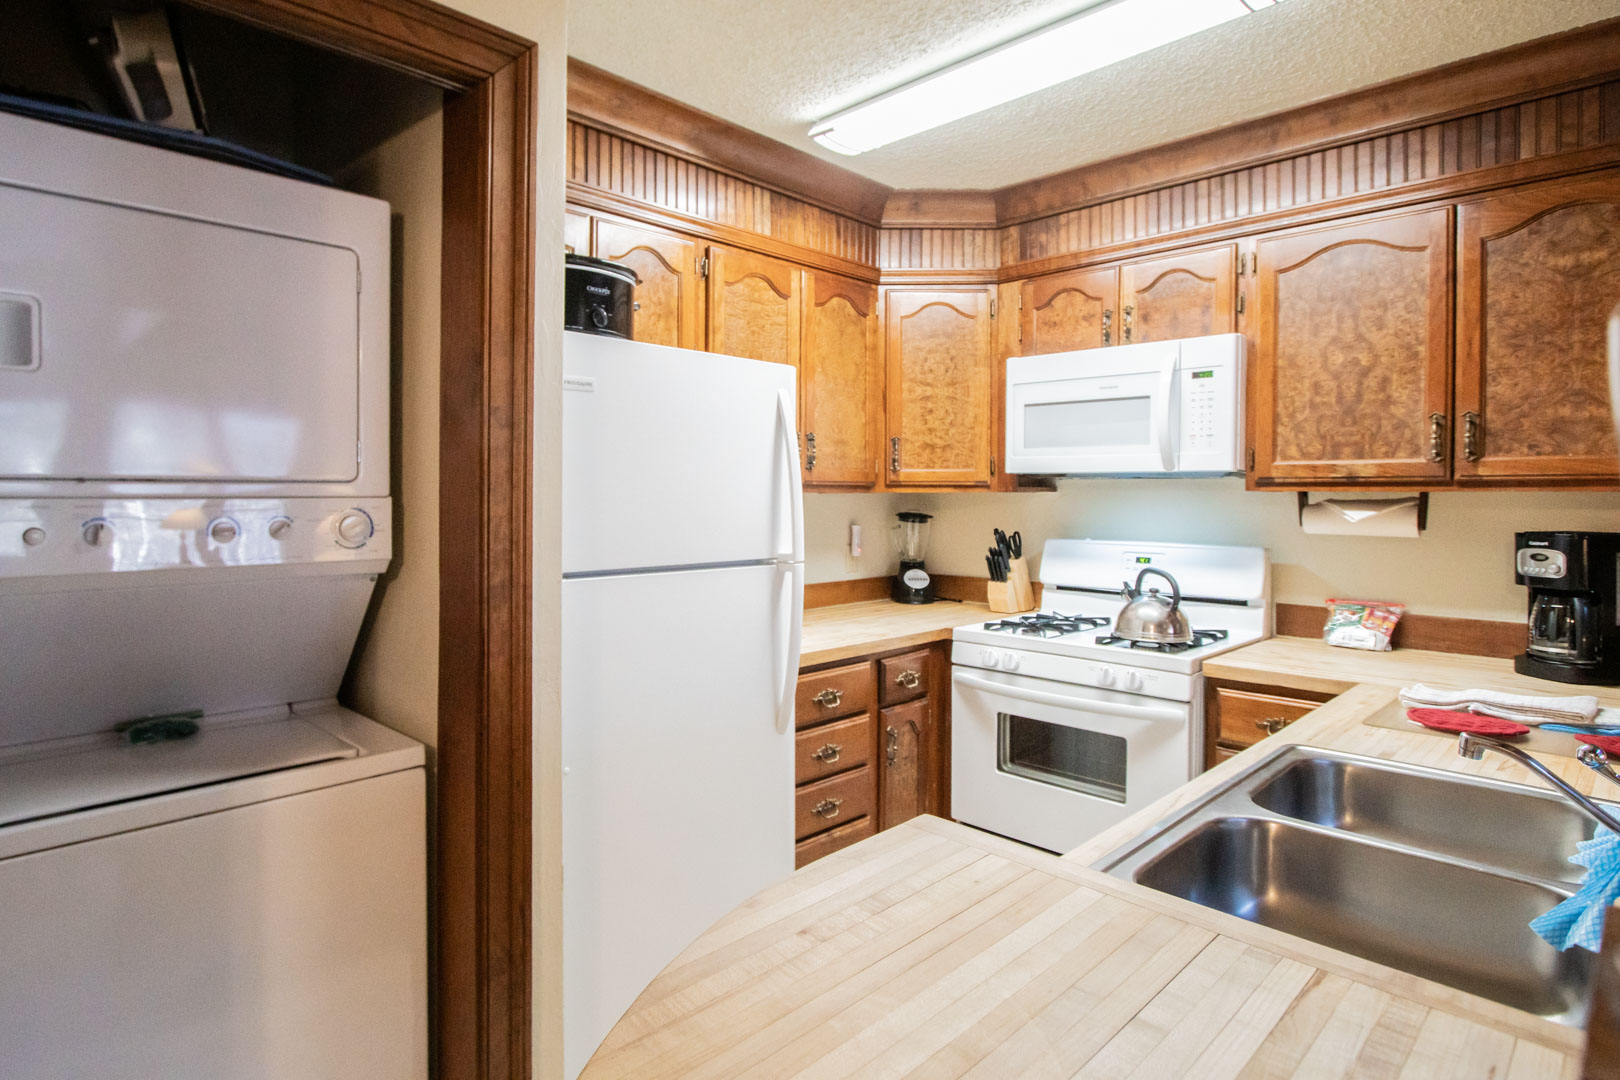 A spacious kitchen and washing machine in the units at VRI's Sunburst Resort in Steamboat Springs, CO.